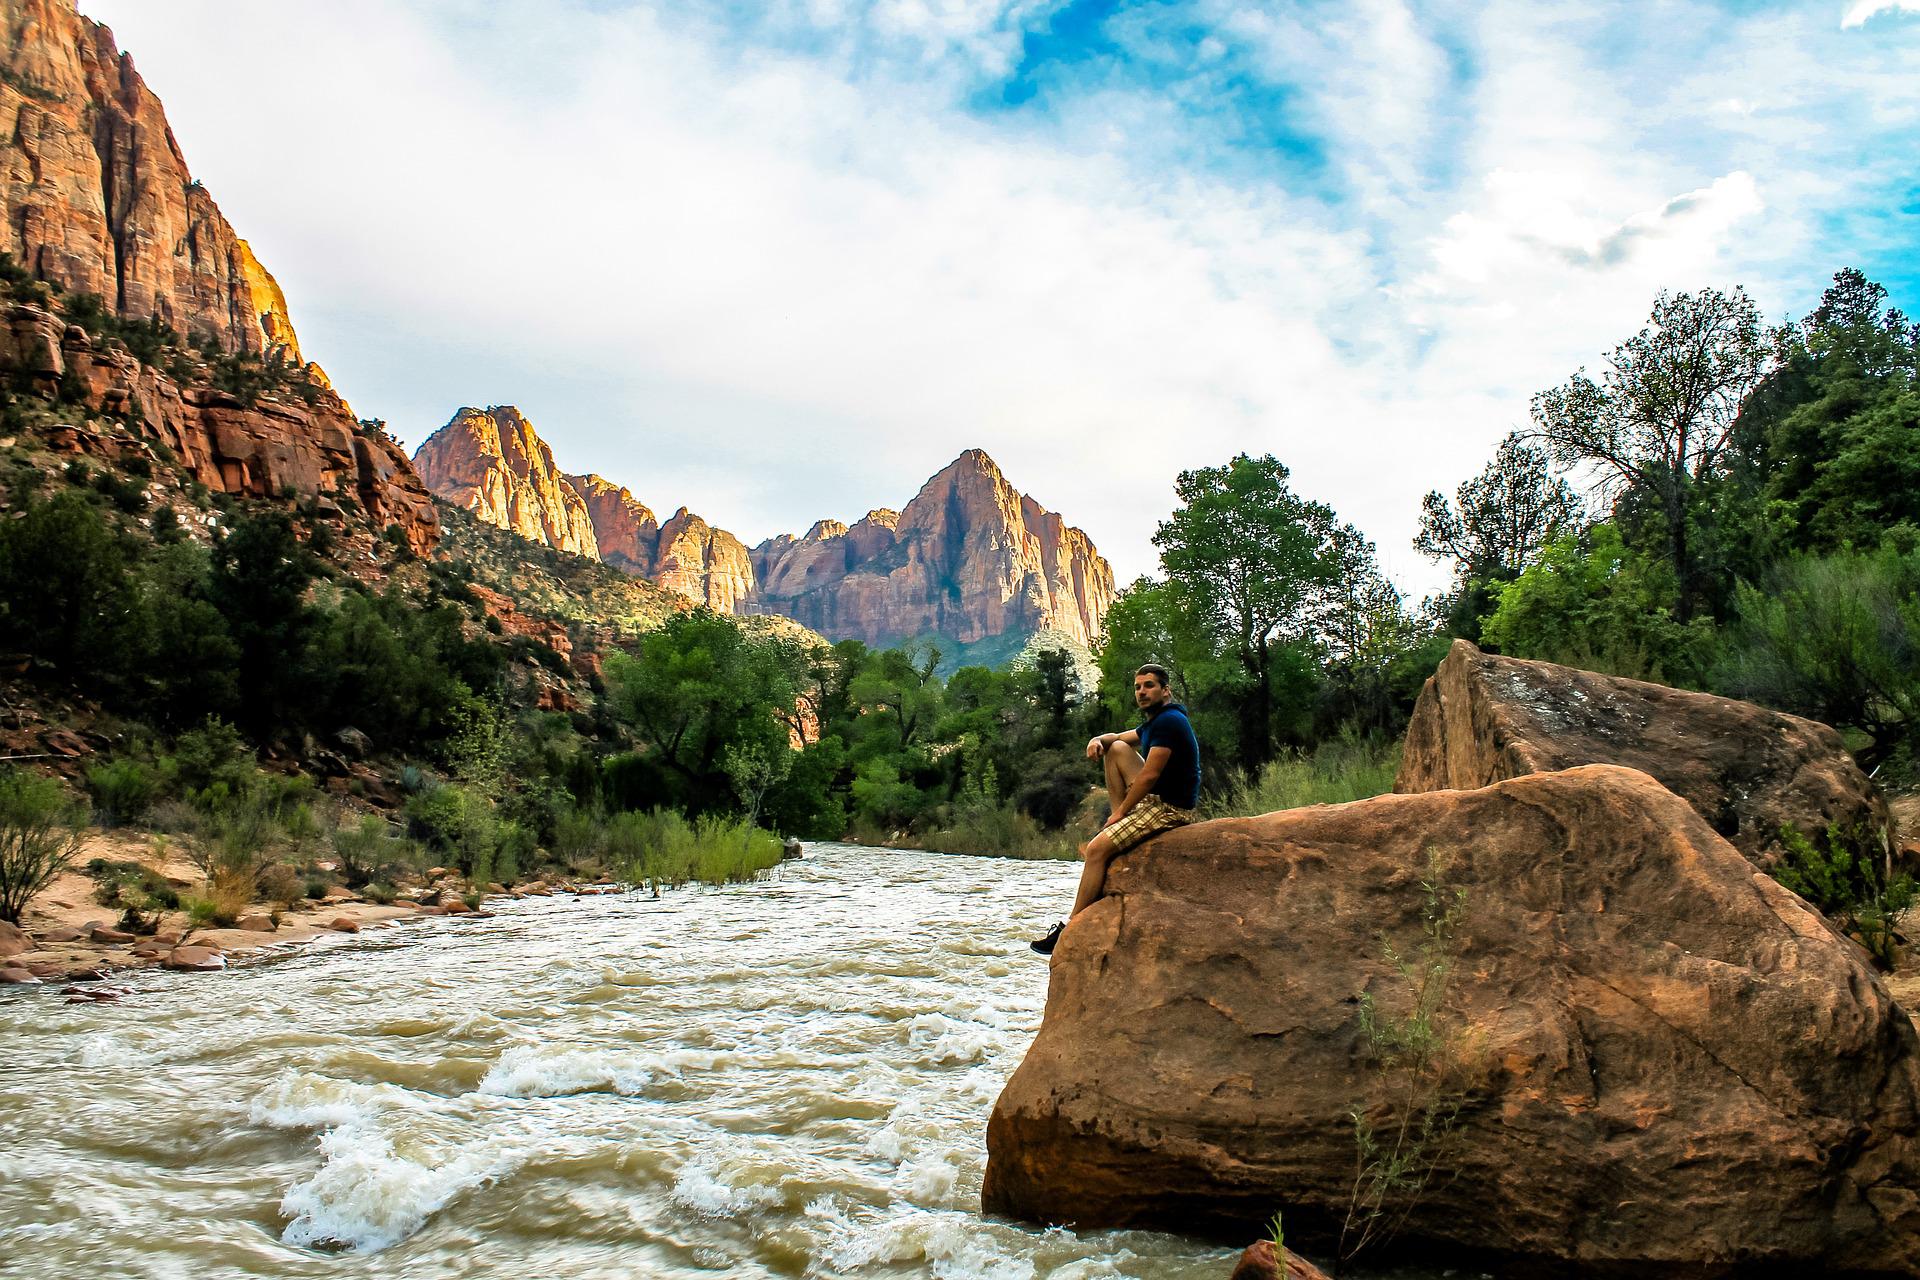 A man sits on a boulder next to a fast-moving river in Zion National Park.